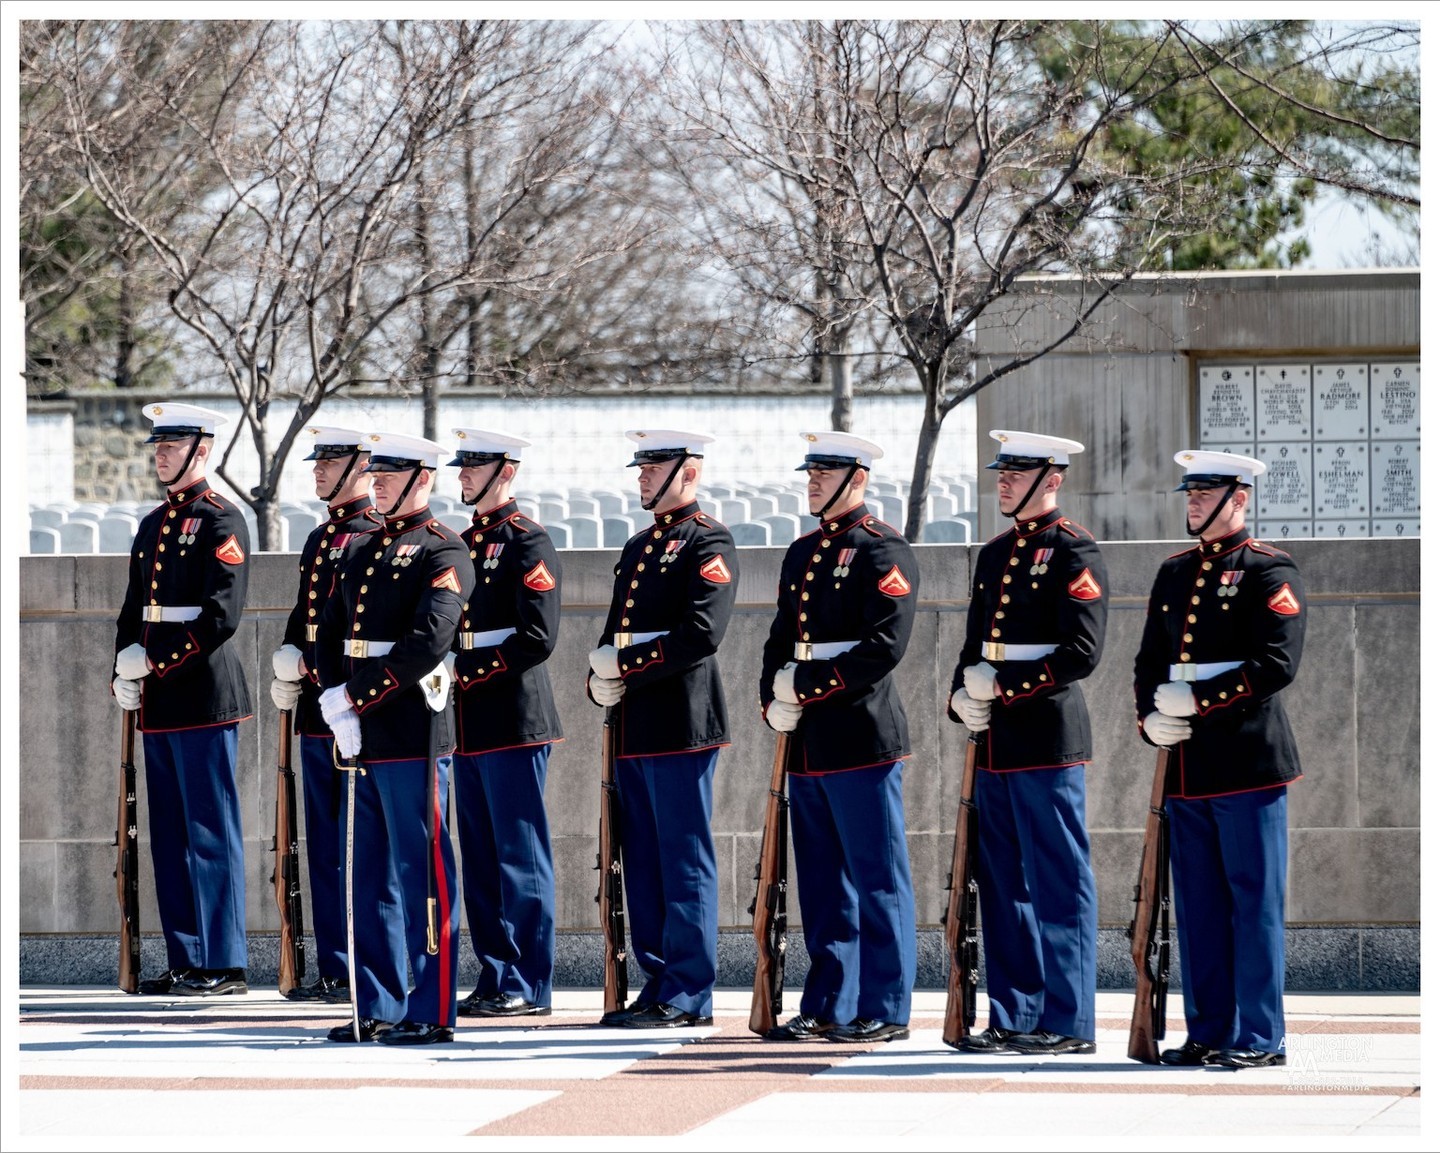 A US Marine Corps rifle platoon stands ready for a service on Nimitz Drive. 

Military funerals have their own rites and traditions that have evolved through the ages. The returning of the dead, preparation of the body, funeral service with orations, procession to place of interment (with escorts and music), graveside rites, etc…, all have their roots from antiquity.

Today’s customary three volleys fired over a grave probably originated as far back as the Roman Empire. This custom is incorrectly referred to as a “21-gun-salute”.